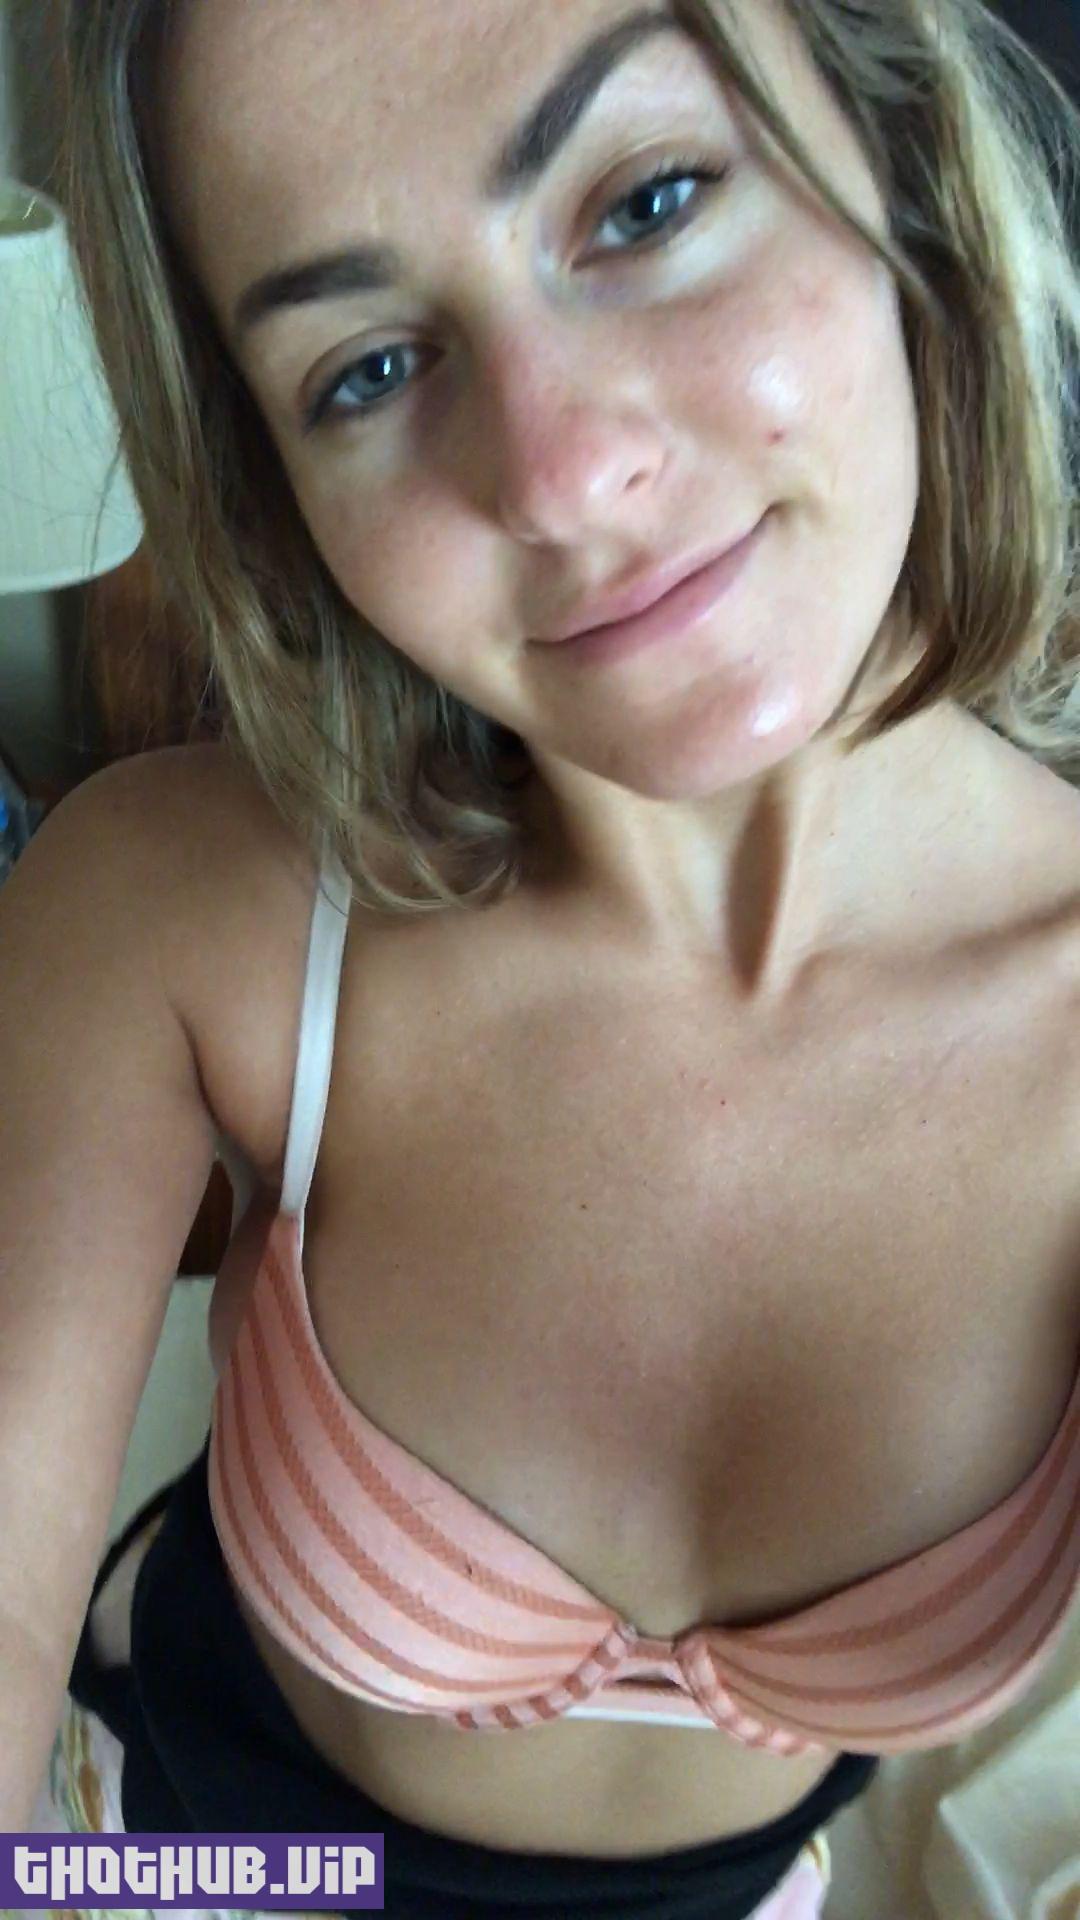 Scout Taylor-Compton nude pussy close-up selfies leaked from hacked iCloud